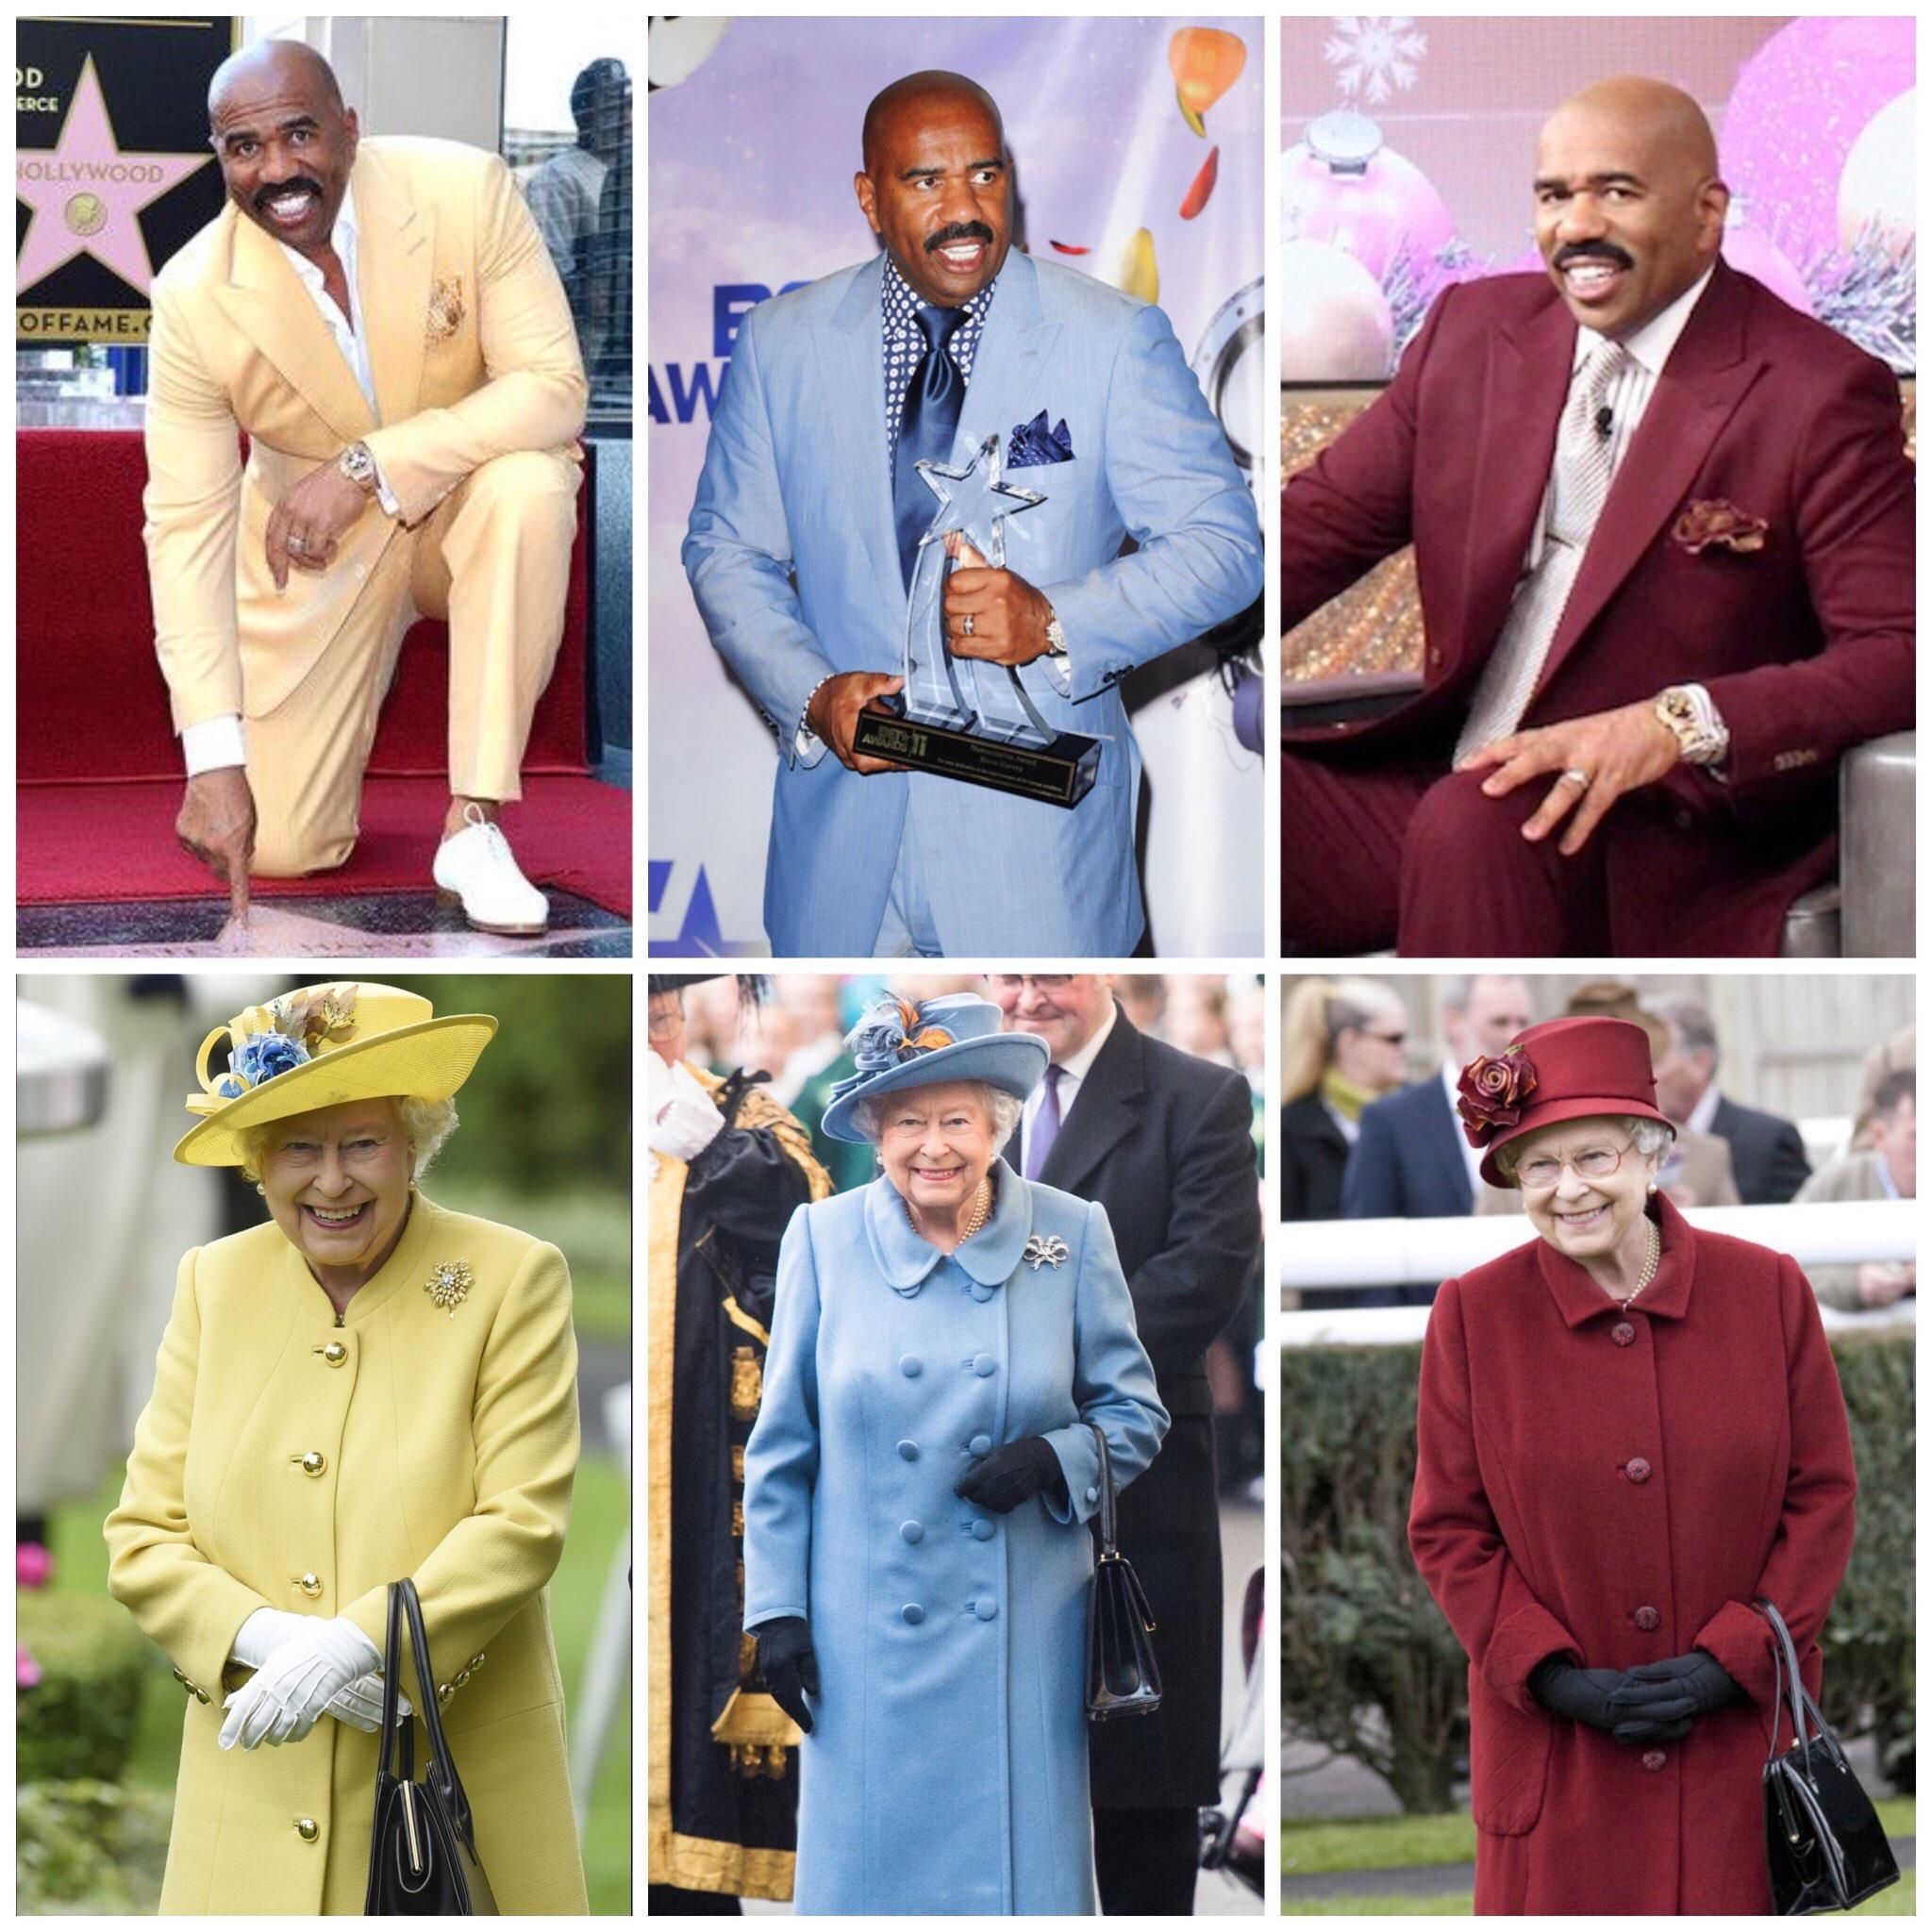 Queen Elizabeth and Steve Harvey always dress like they’re going to the prom together